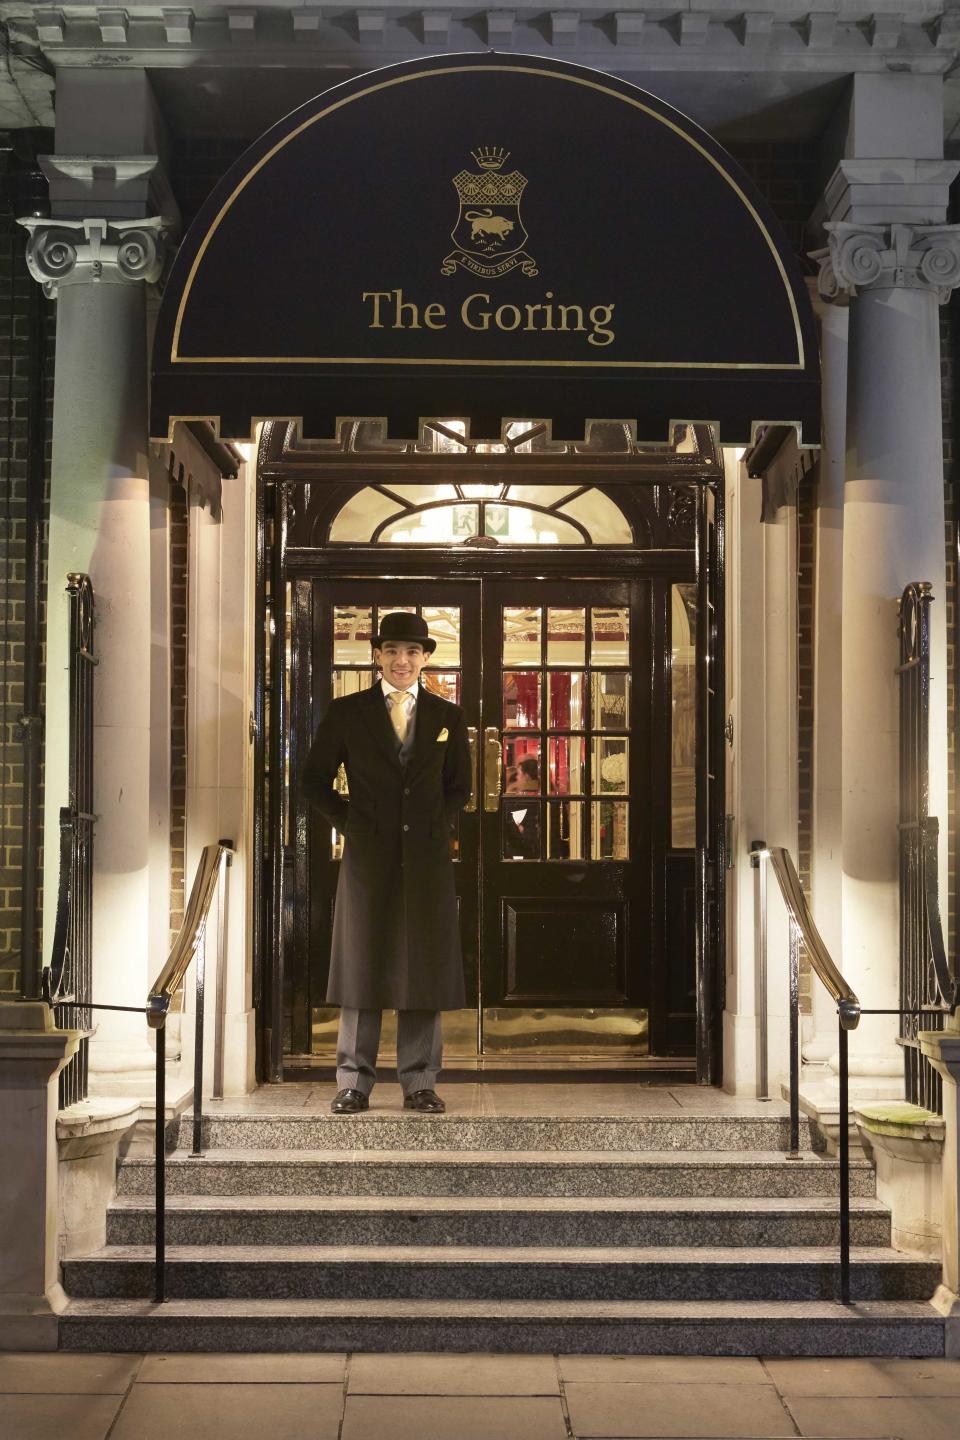 Photo credit: The Goring